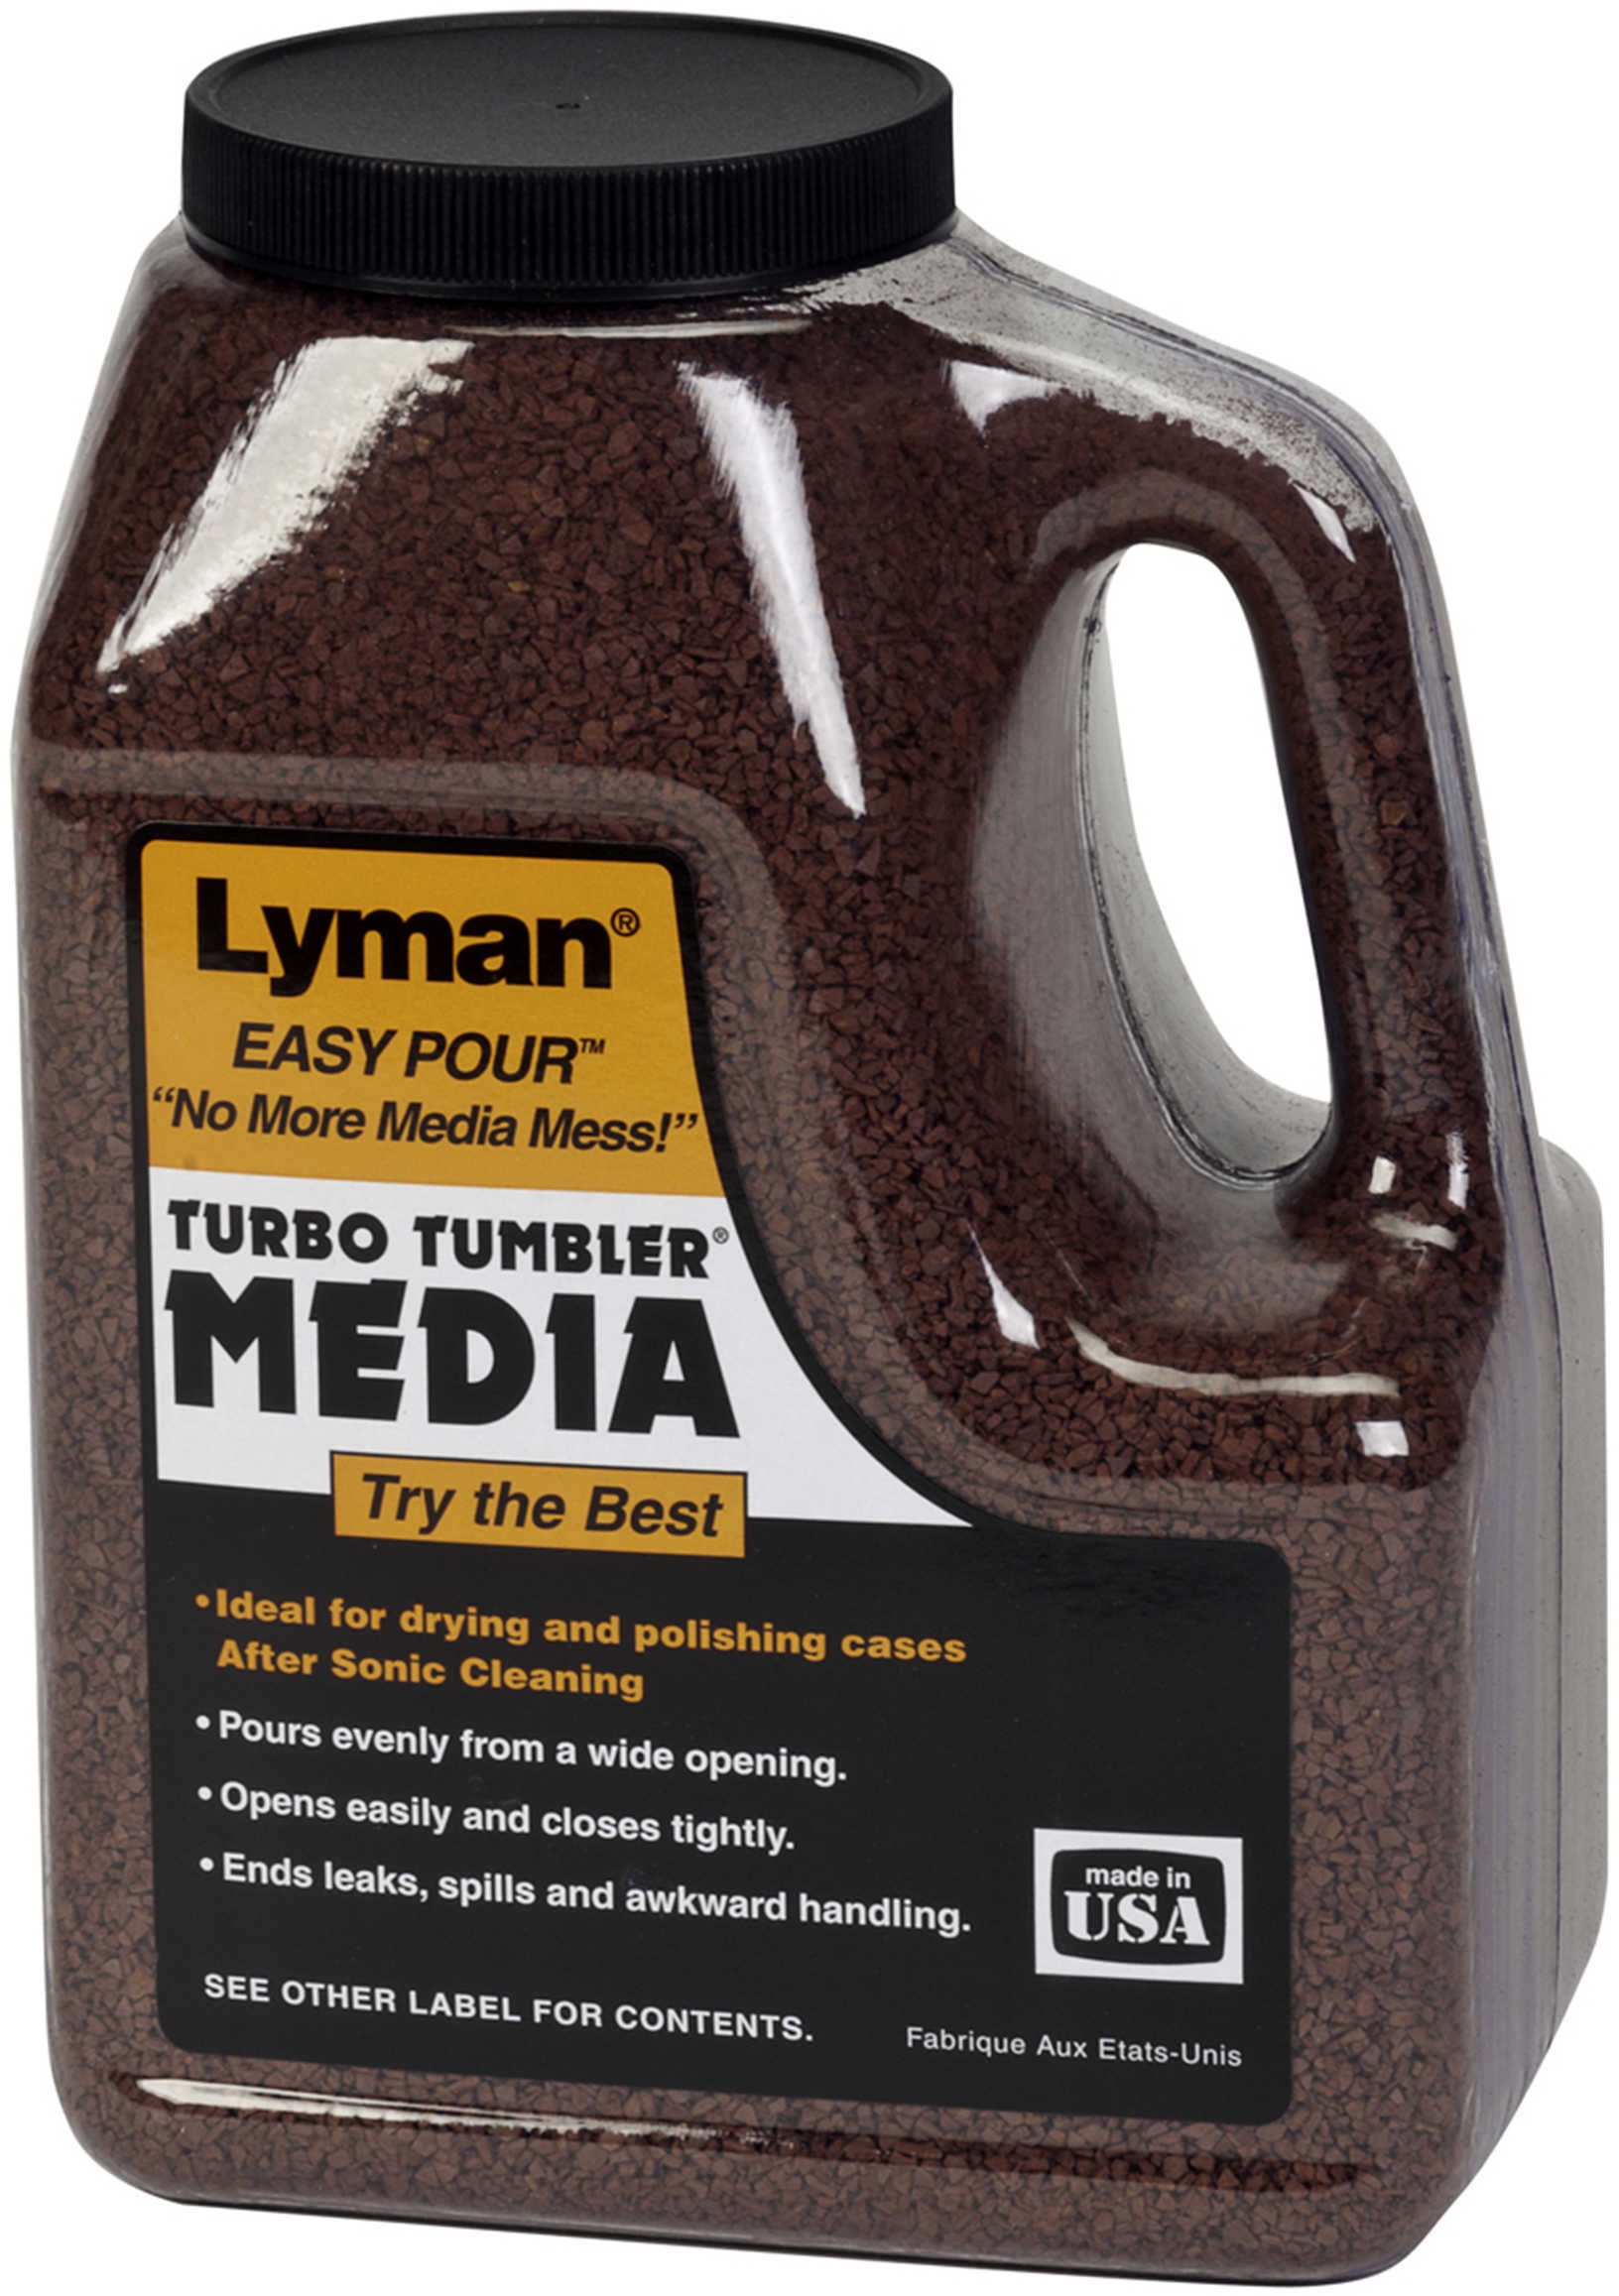 Lyman Turbo Case Cleaning Media Tufnut - 3 Lb. Box The Most Effective Choice For Dirty And Tarnished Cases